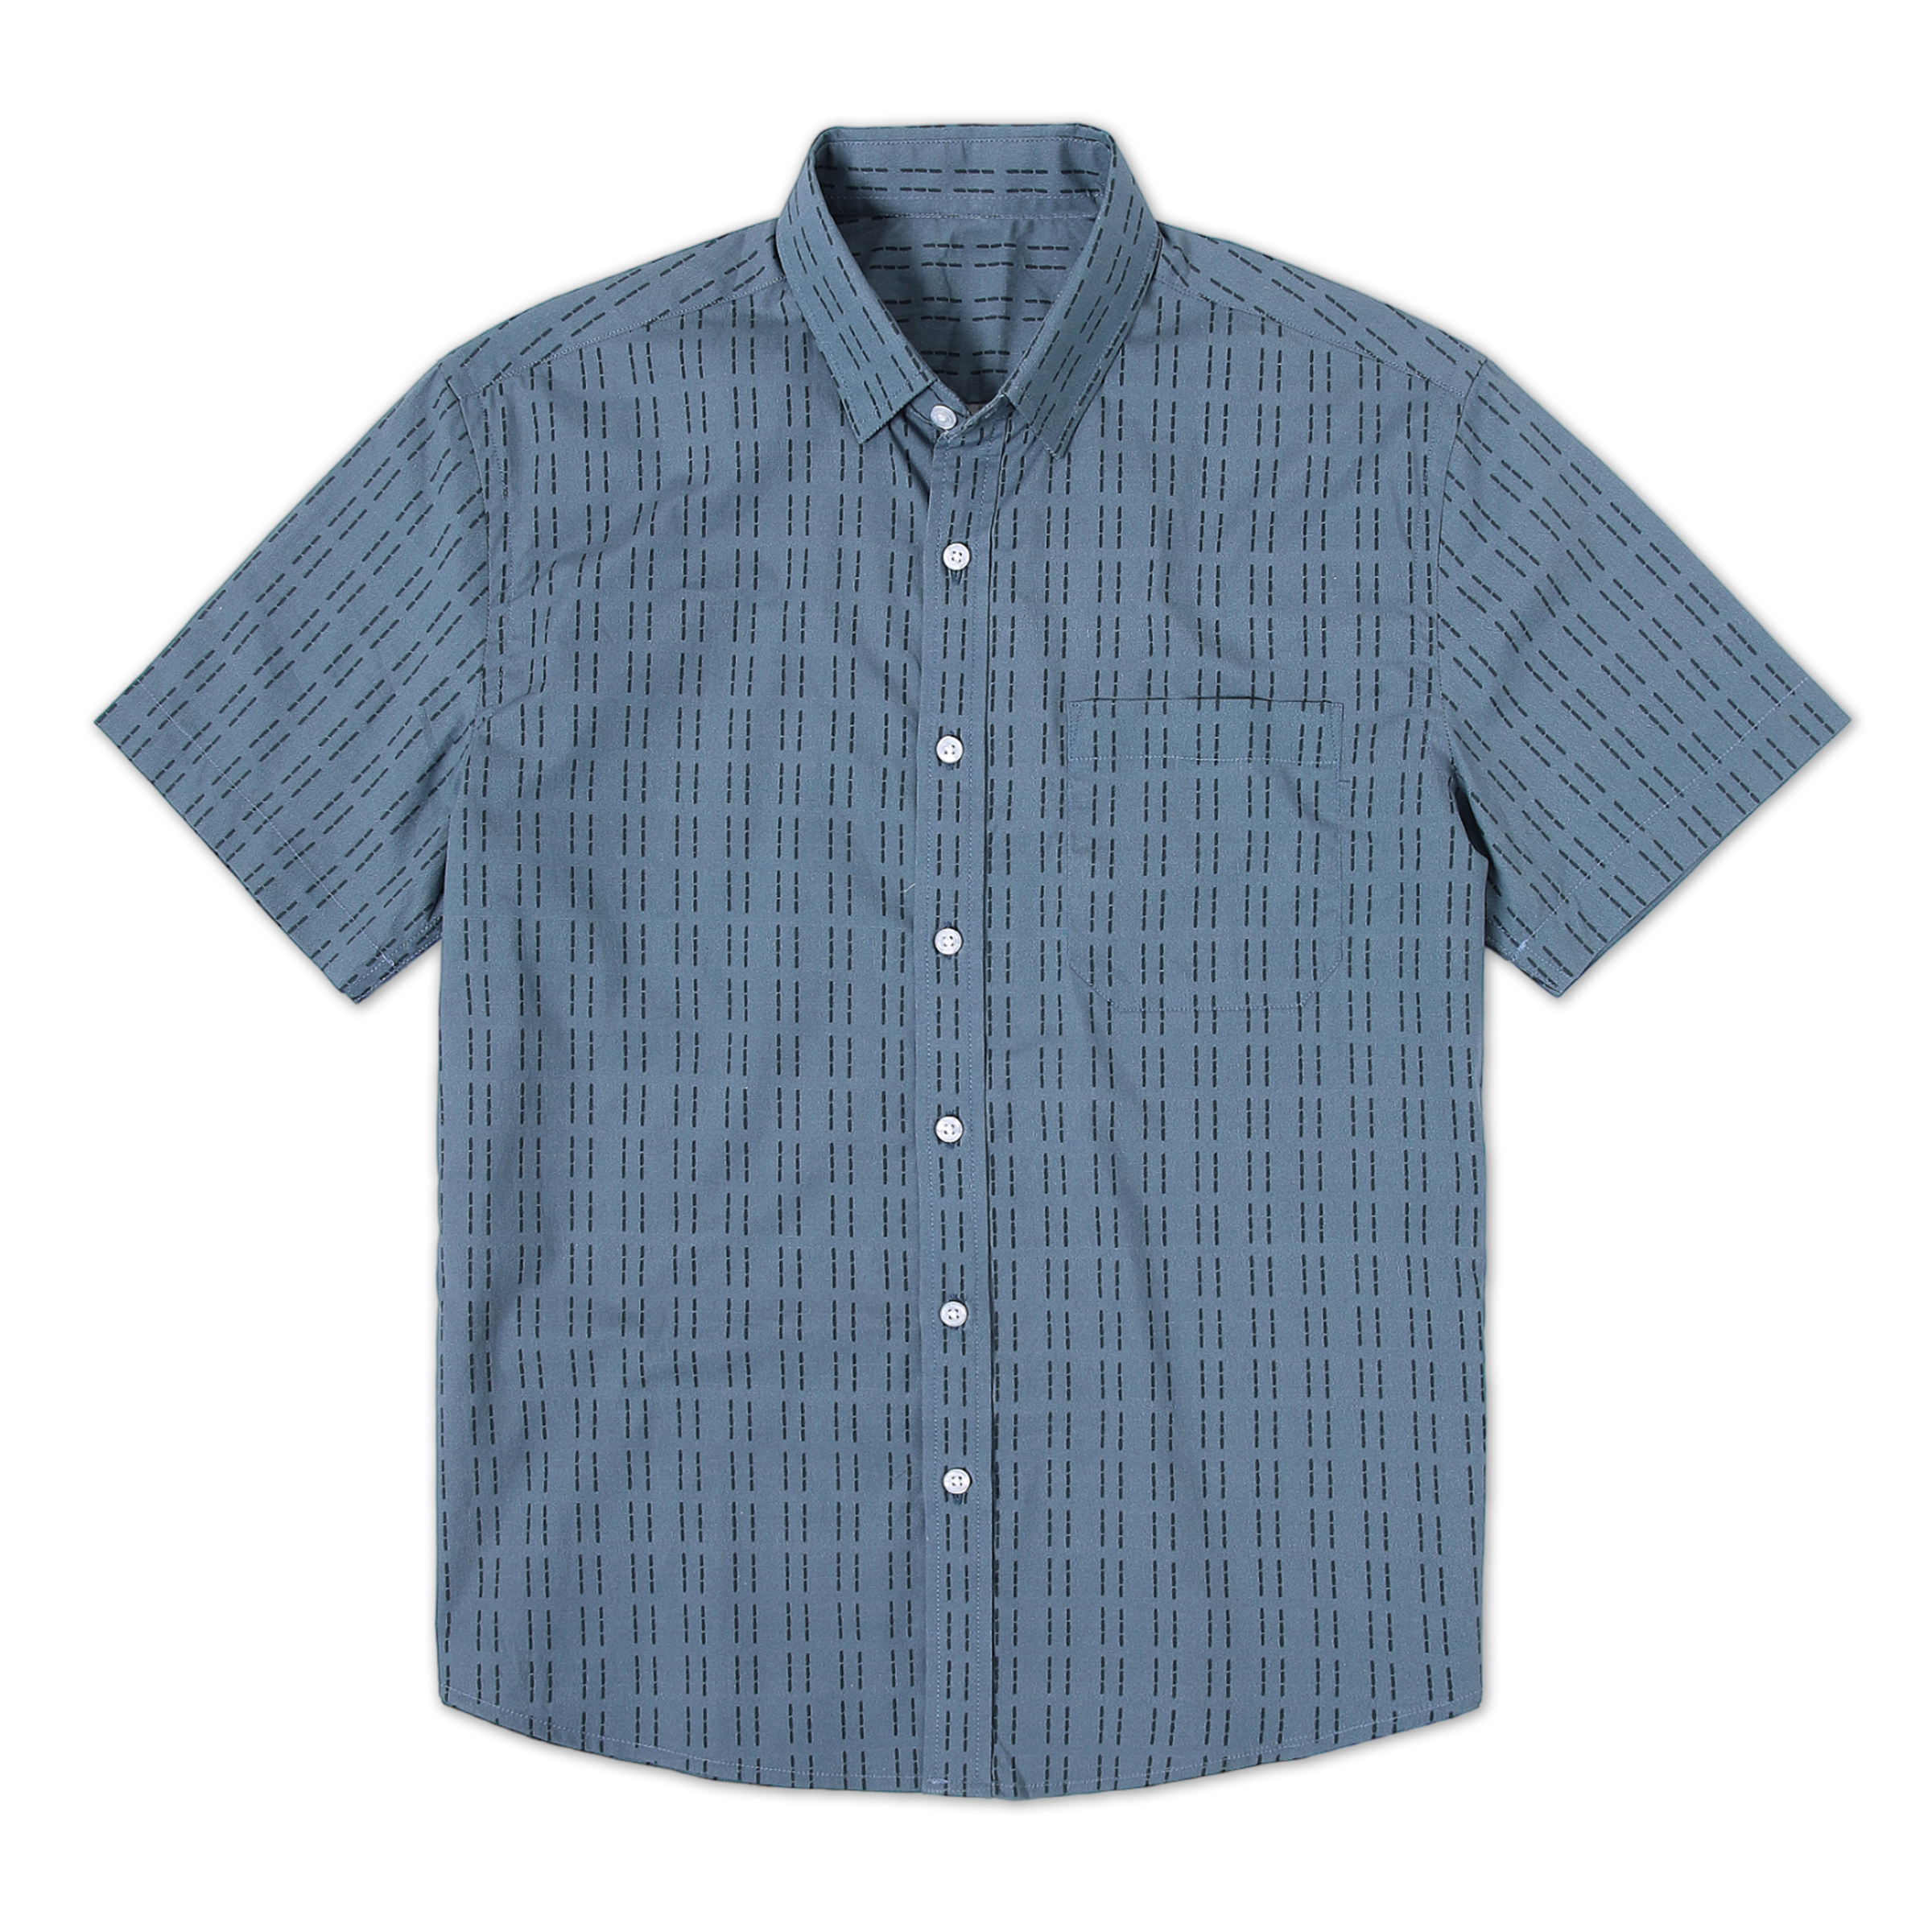 Marina Shirt Dash Blue front with white buttons, button collar, short sleeves and front left patch pocket